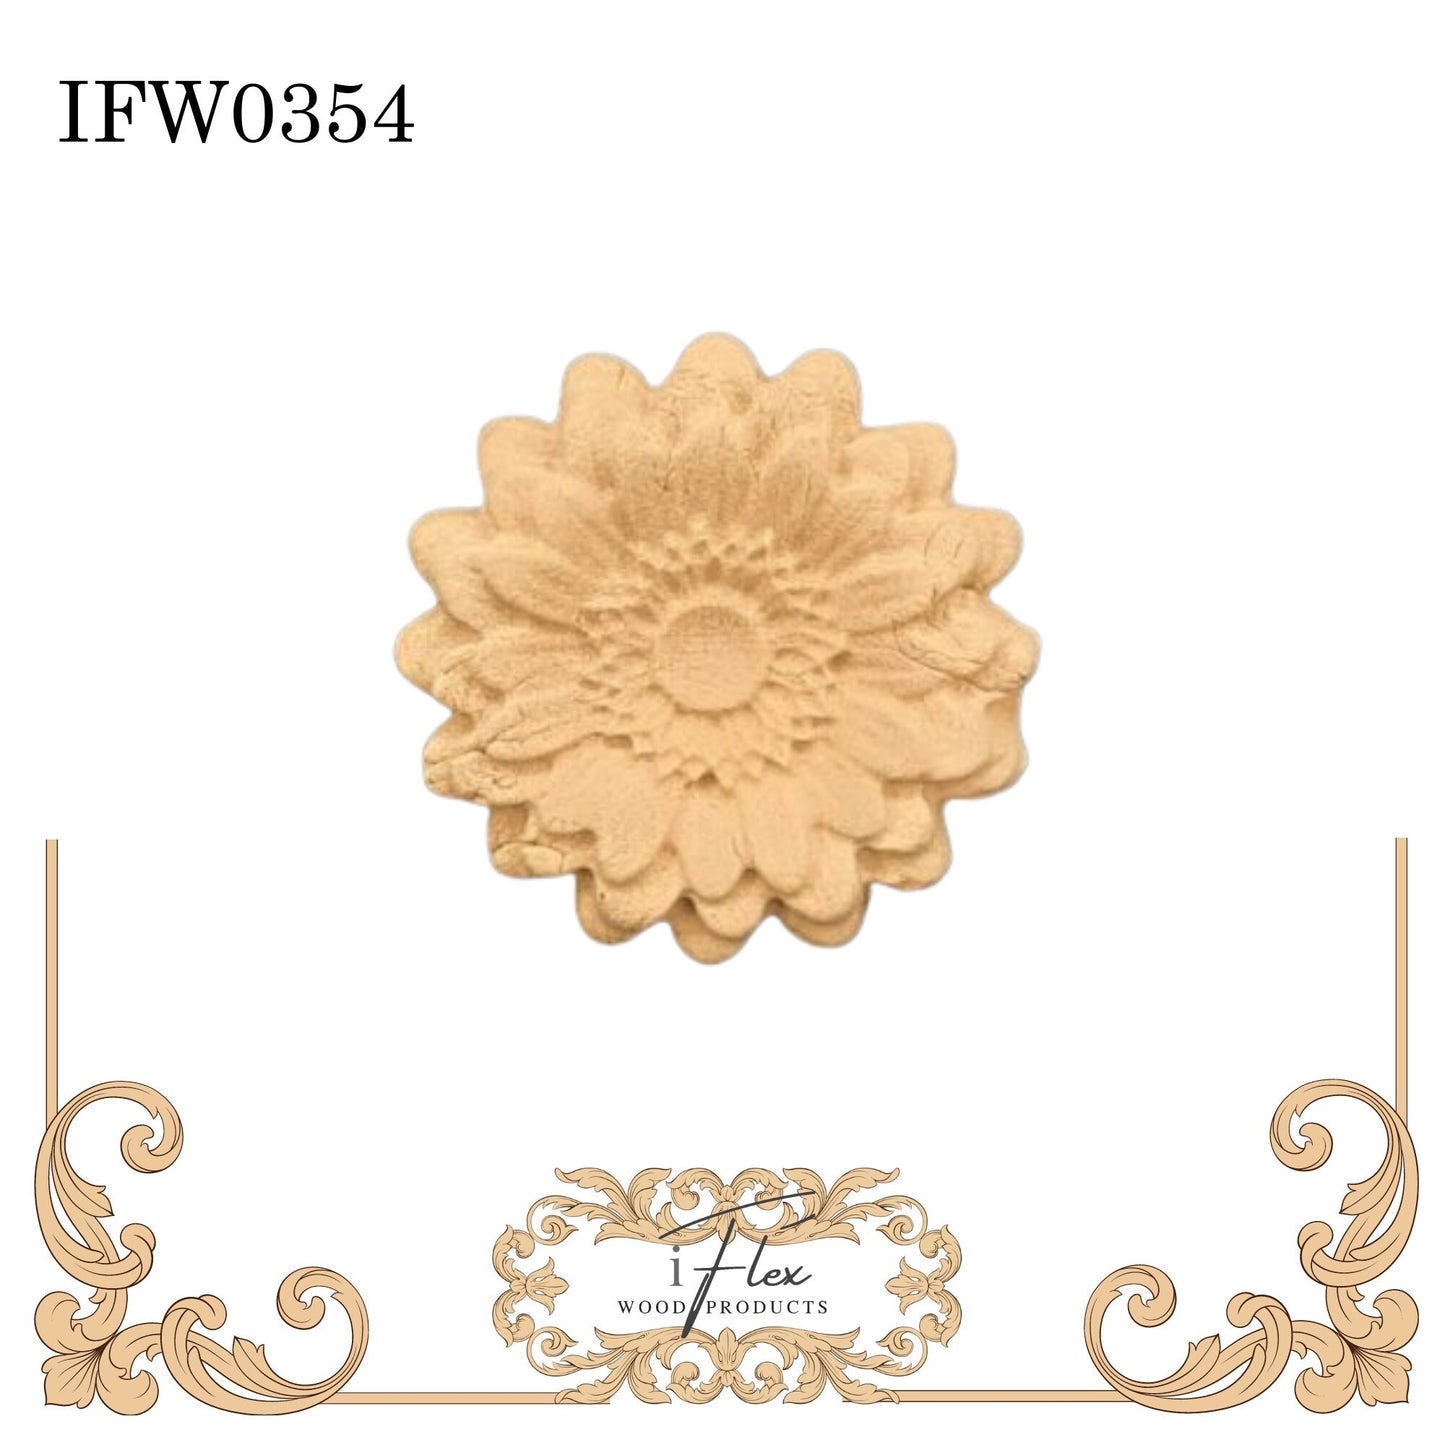 IFW 0354  iFlex Wood Products Flower bendable mouldings, flexible, wooden appliques